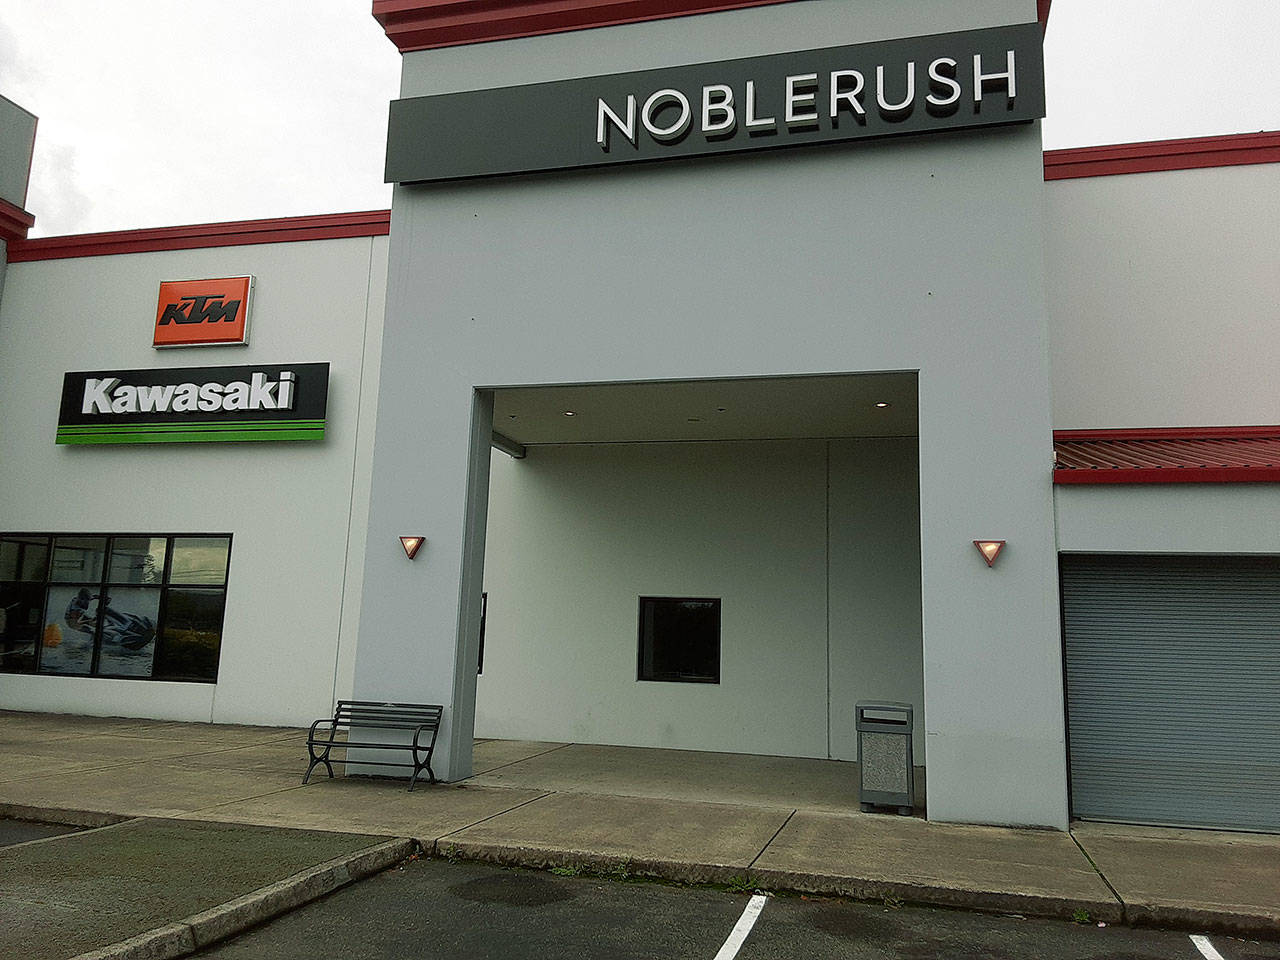 NobleRush, formerly Hinshaw’s Motorcycle Store, at 611 W. Valley Highway S., was silent and empty, doors locked and without a “closed” sign Tuesday. ROBERT WHALE, Auburn Reporter